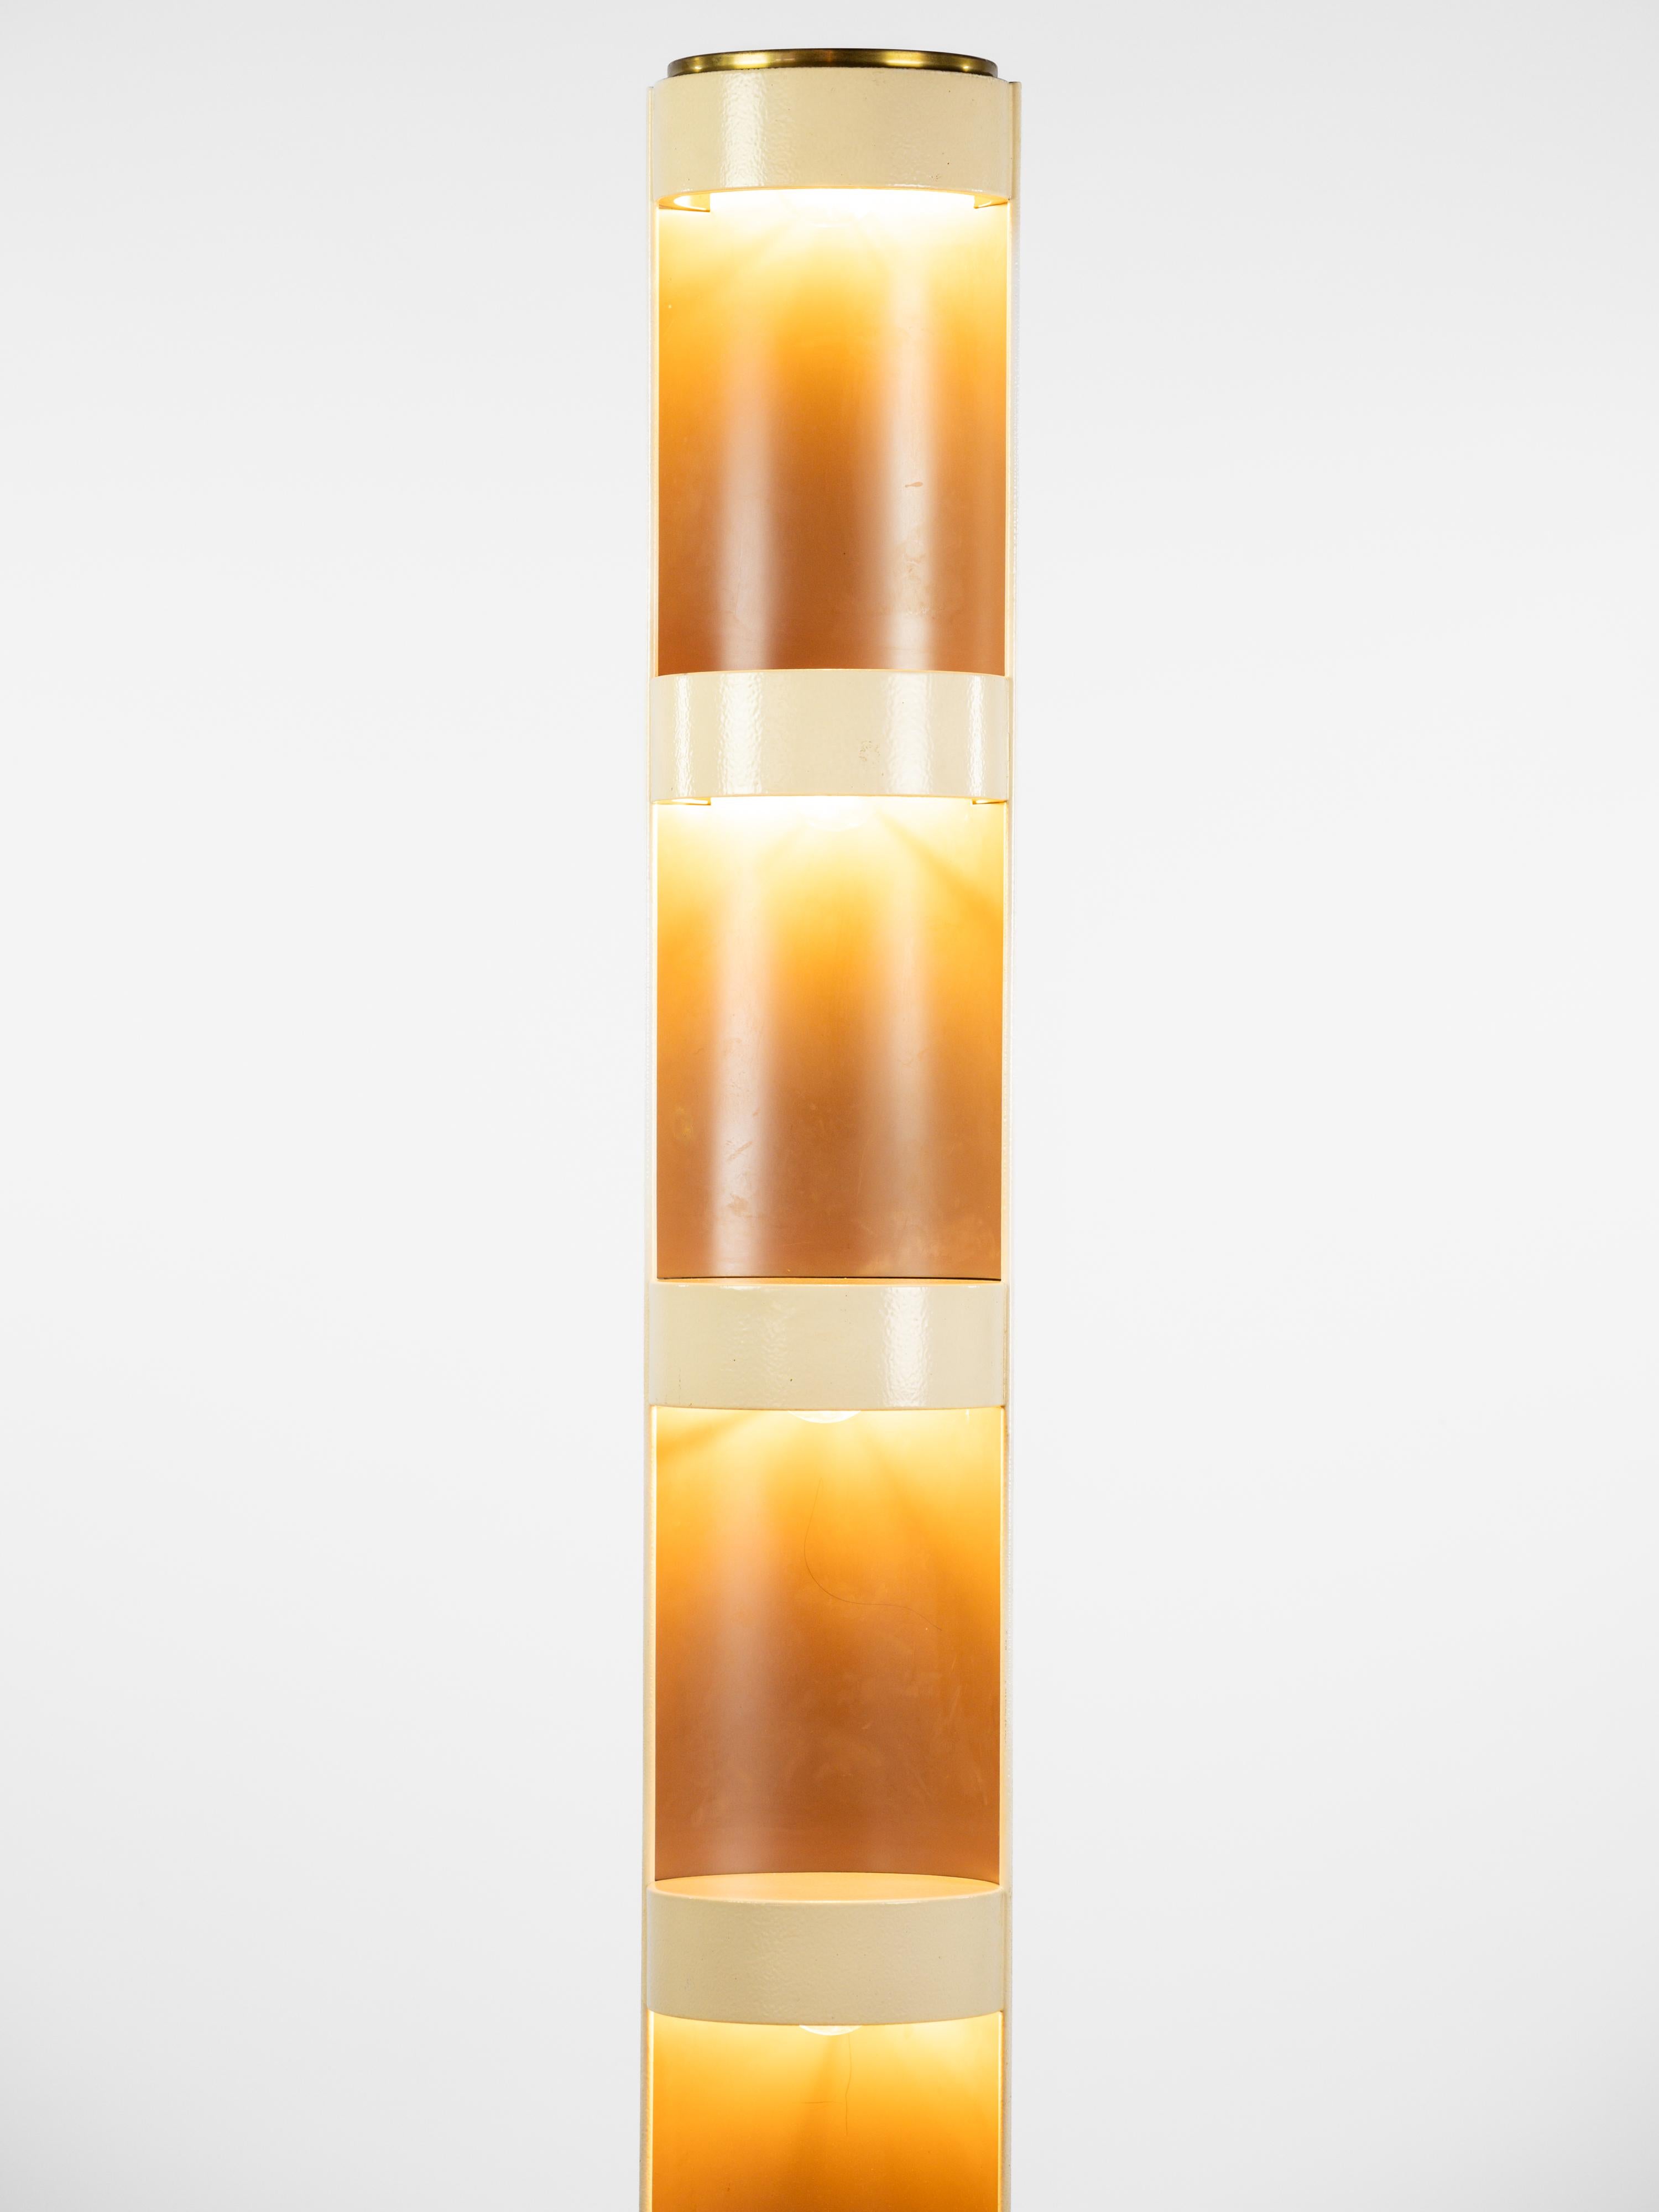 Minimalist tower flower lamp in off white lacquered metal with brass designed and produced by Jean Perzel (France)

4 shelves with a light each. 

Circa 1960

H 168 D 19/23 with wall fixation 

More information upon request